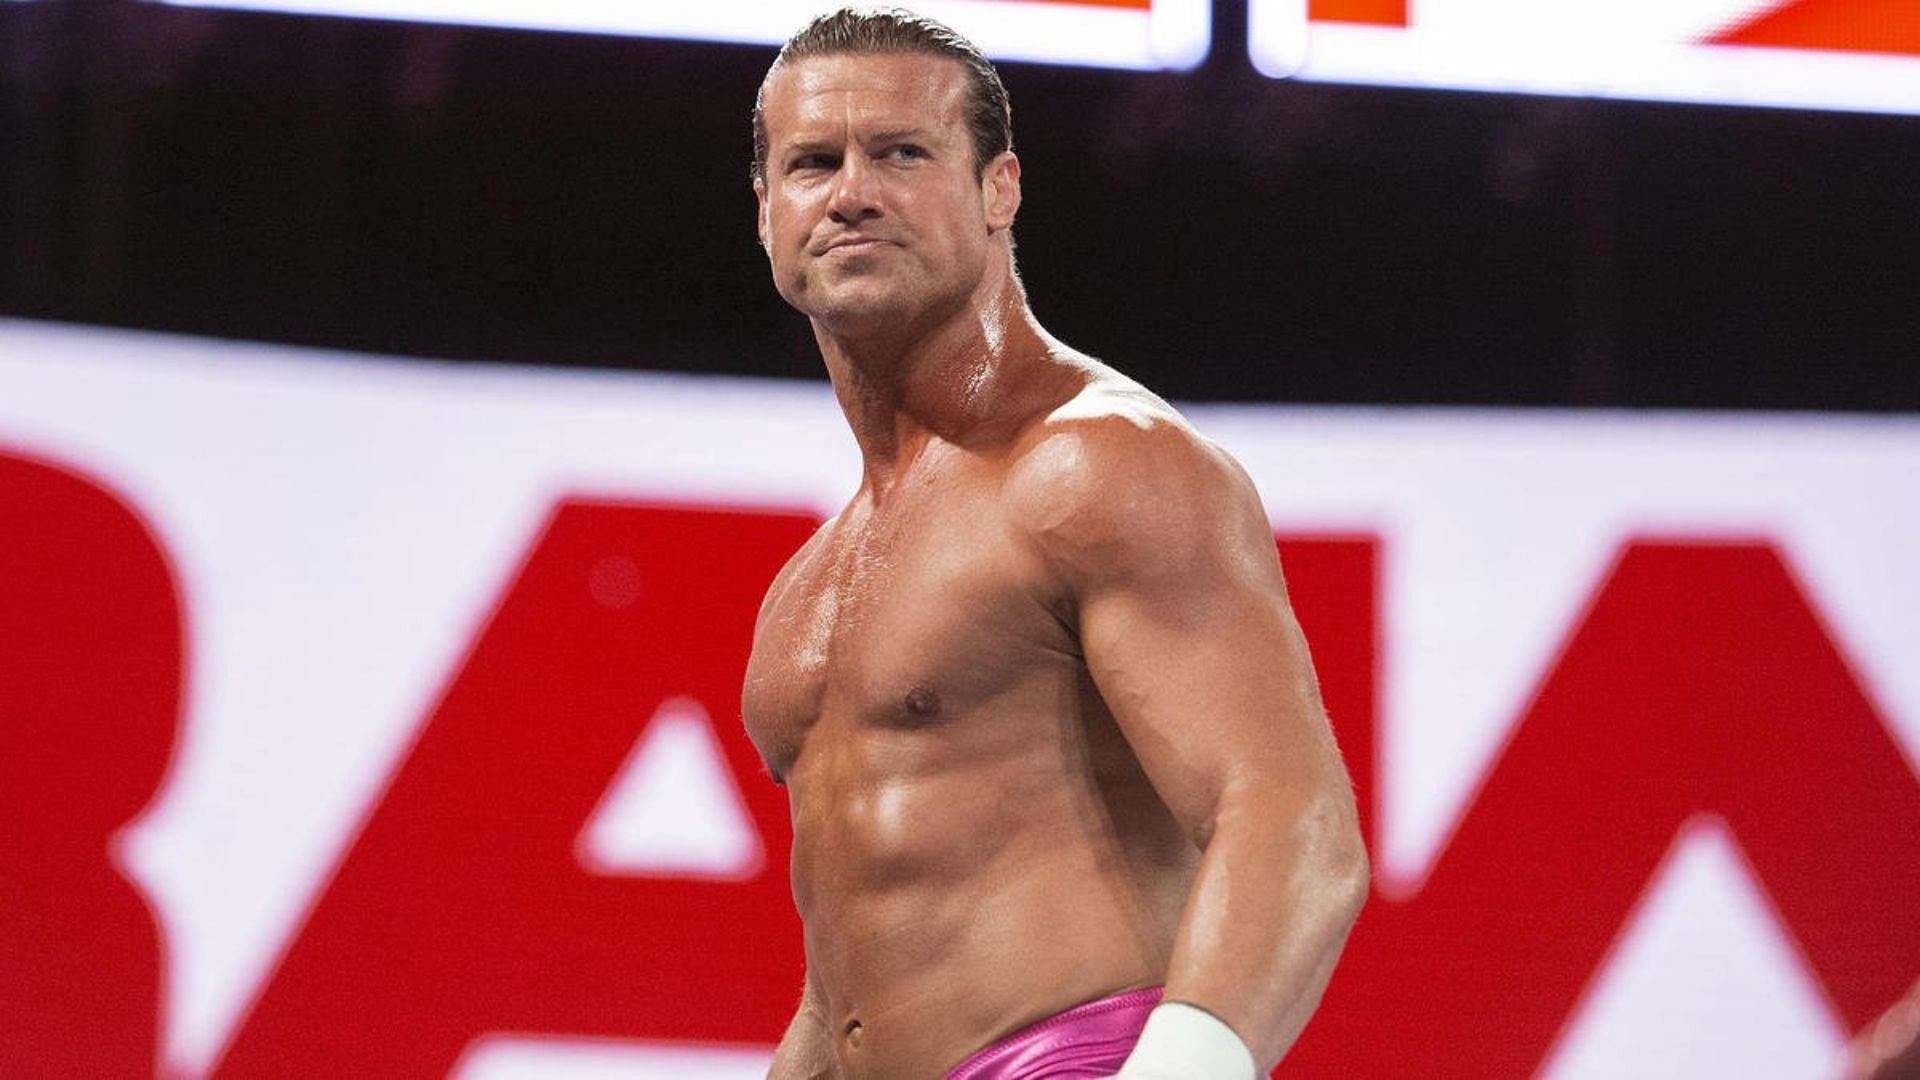 What does Dolph Ziggler